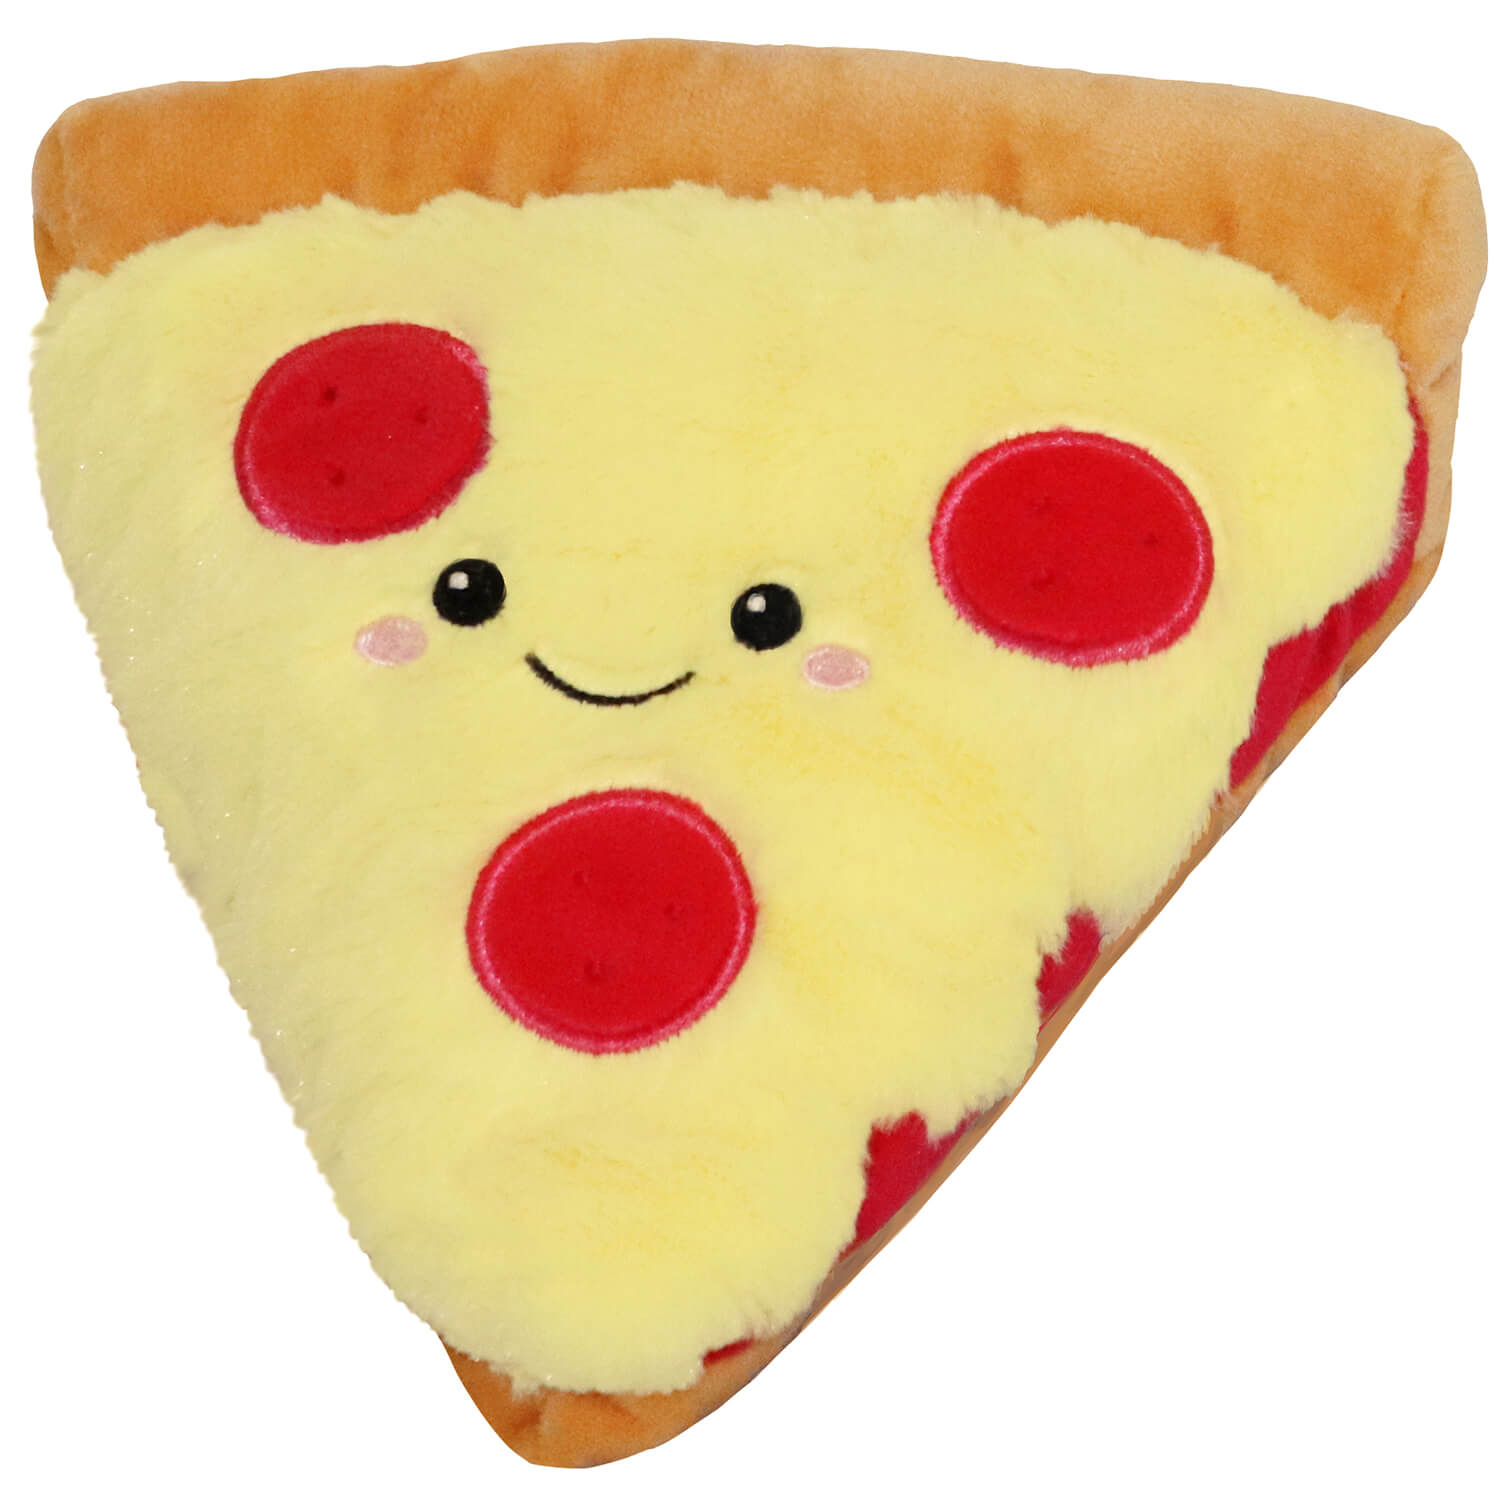 Snugglemi Snackers Pizza Plush from Squishables. Yellow cheese, red pepperoni and a smiley face.